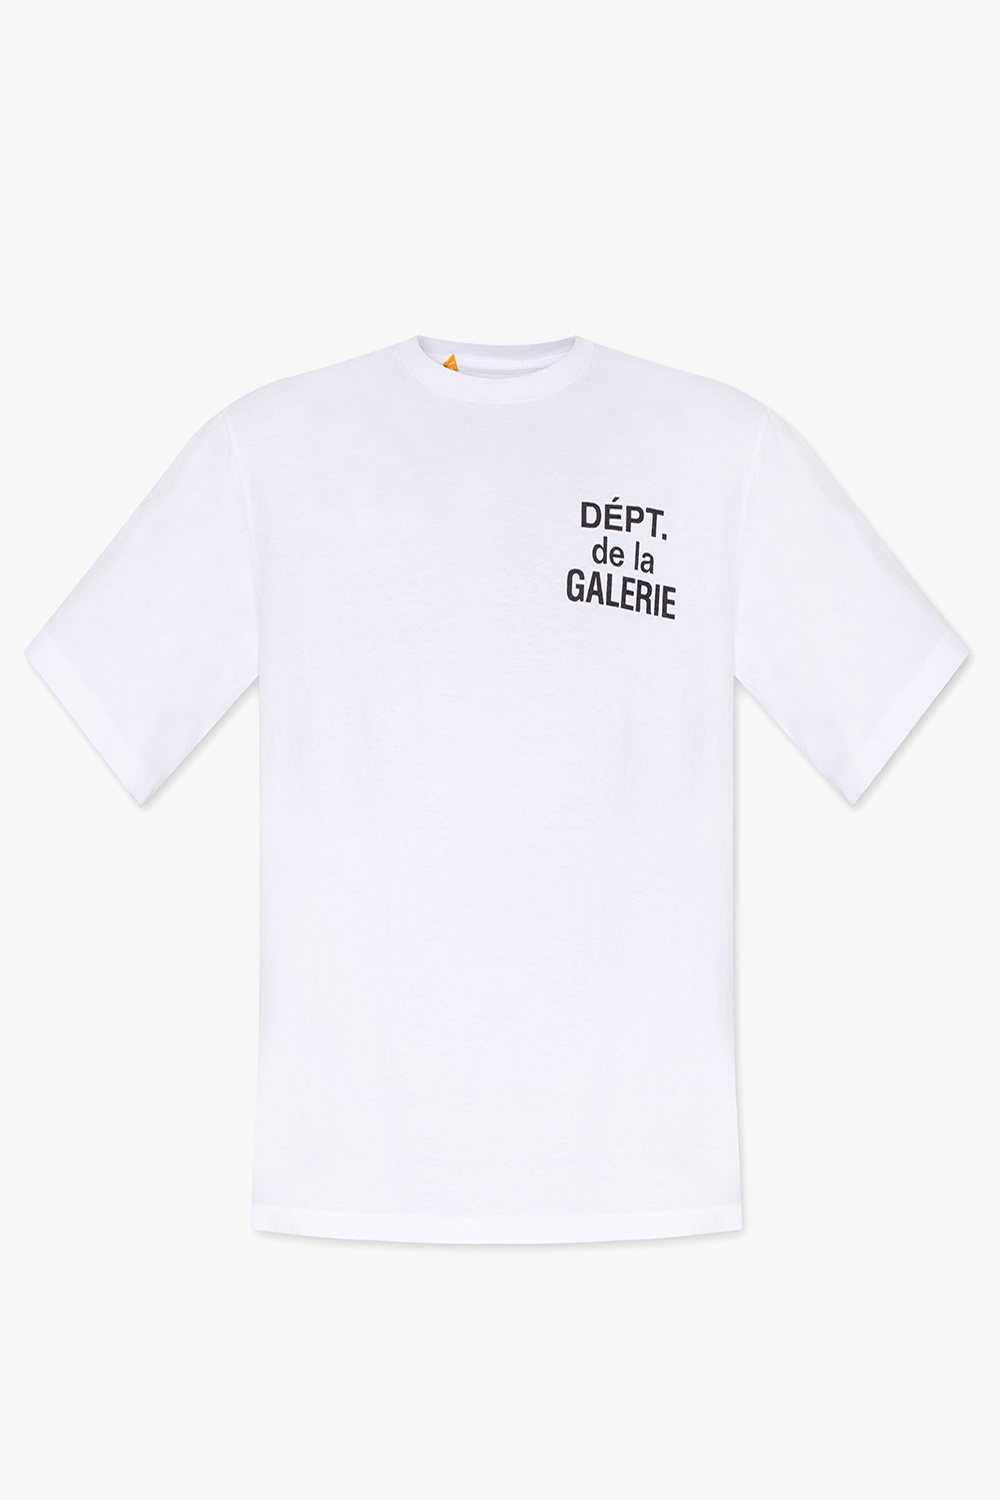 Favourites Crew Clothing Company Pink GALLERY Clothing T | shirt - DEPT. - Polo StclaircomoShops Men\'s | Inactive Shirt Printed